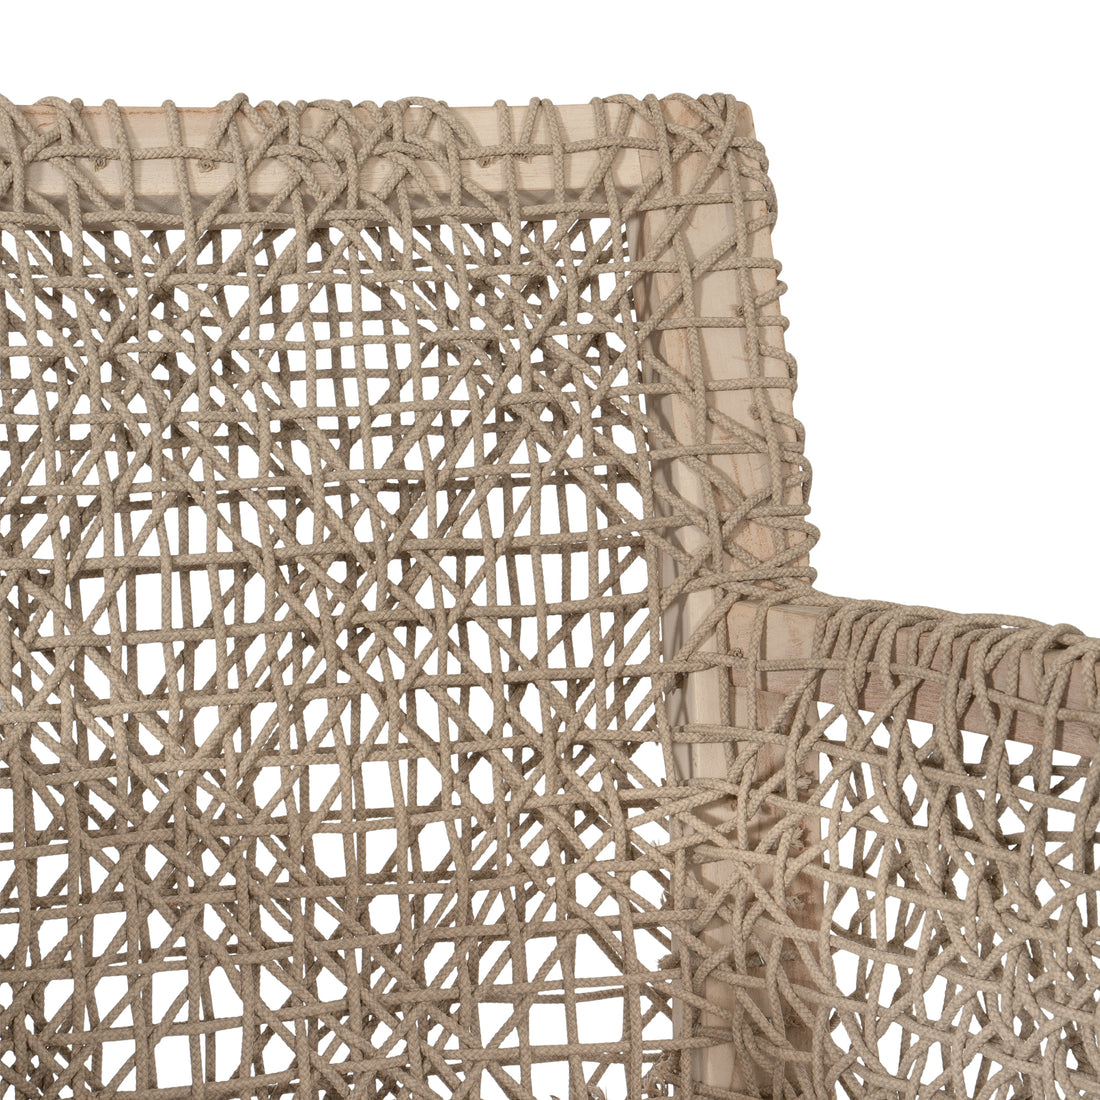 Sweni Armchair | Natural | Rope